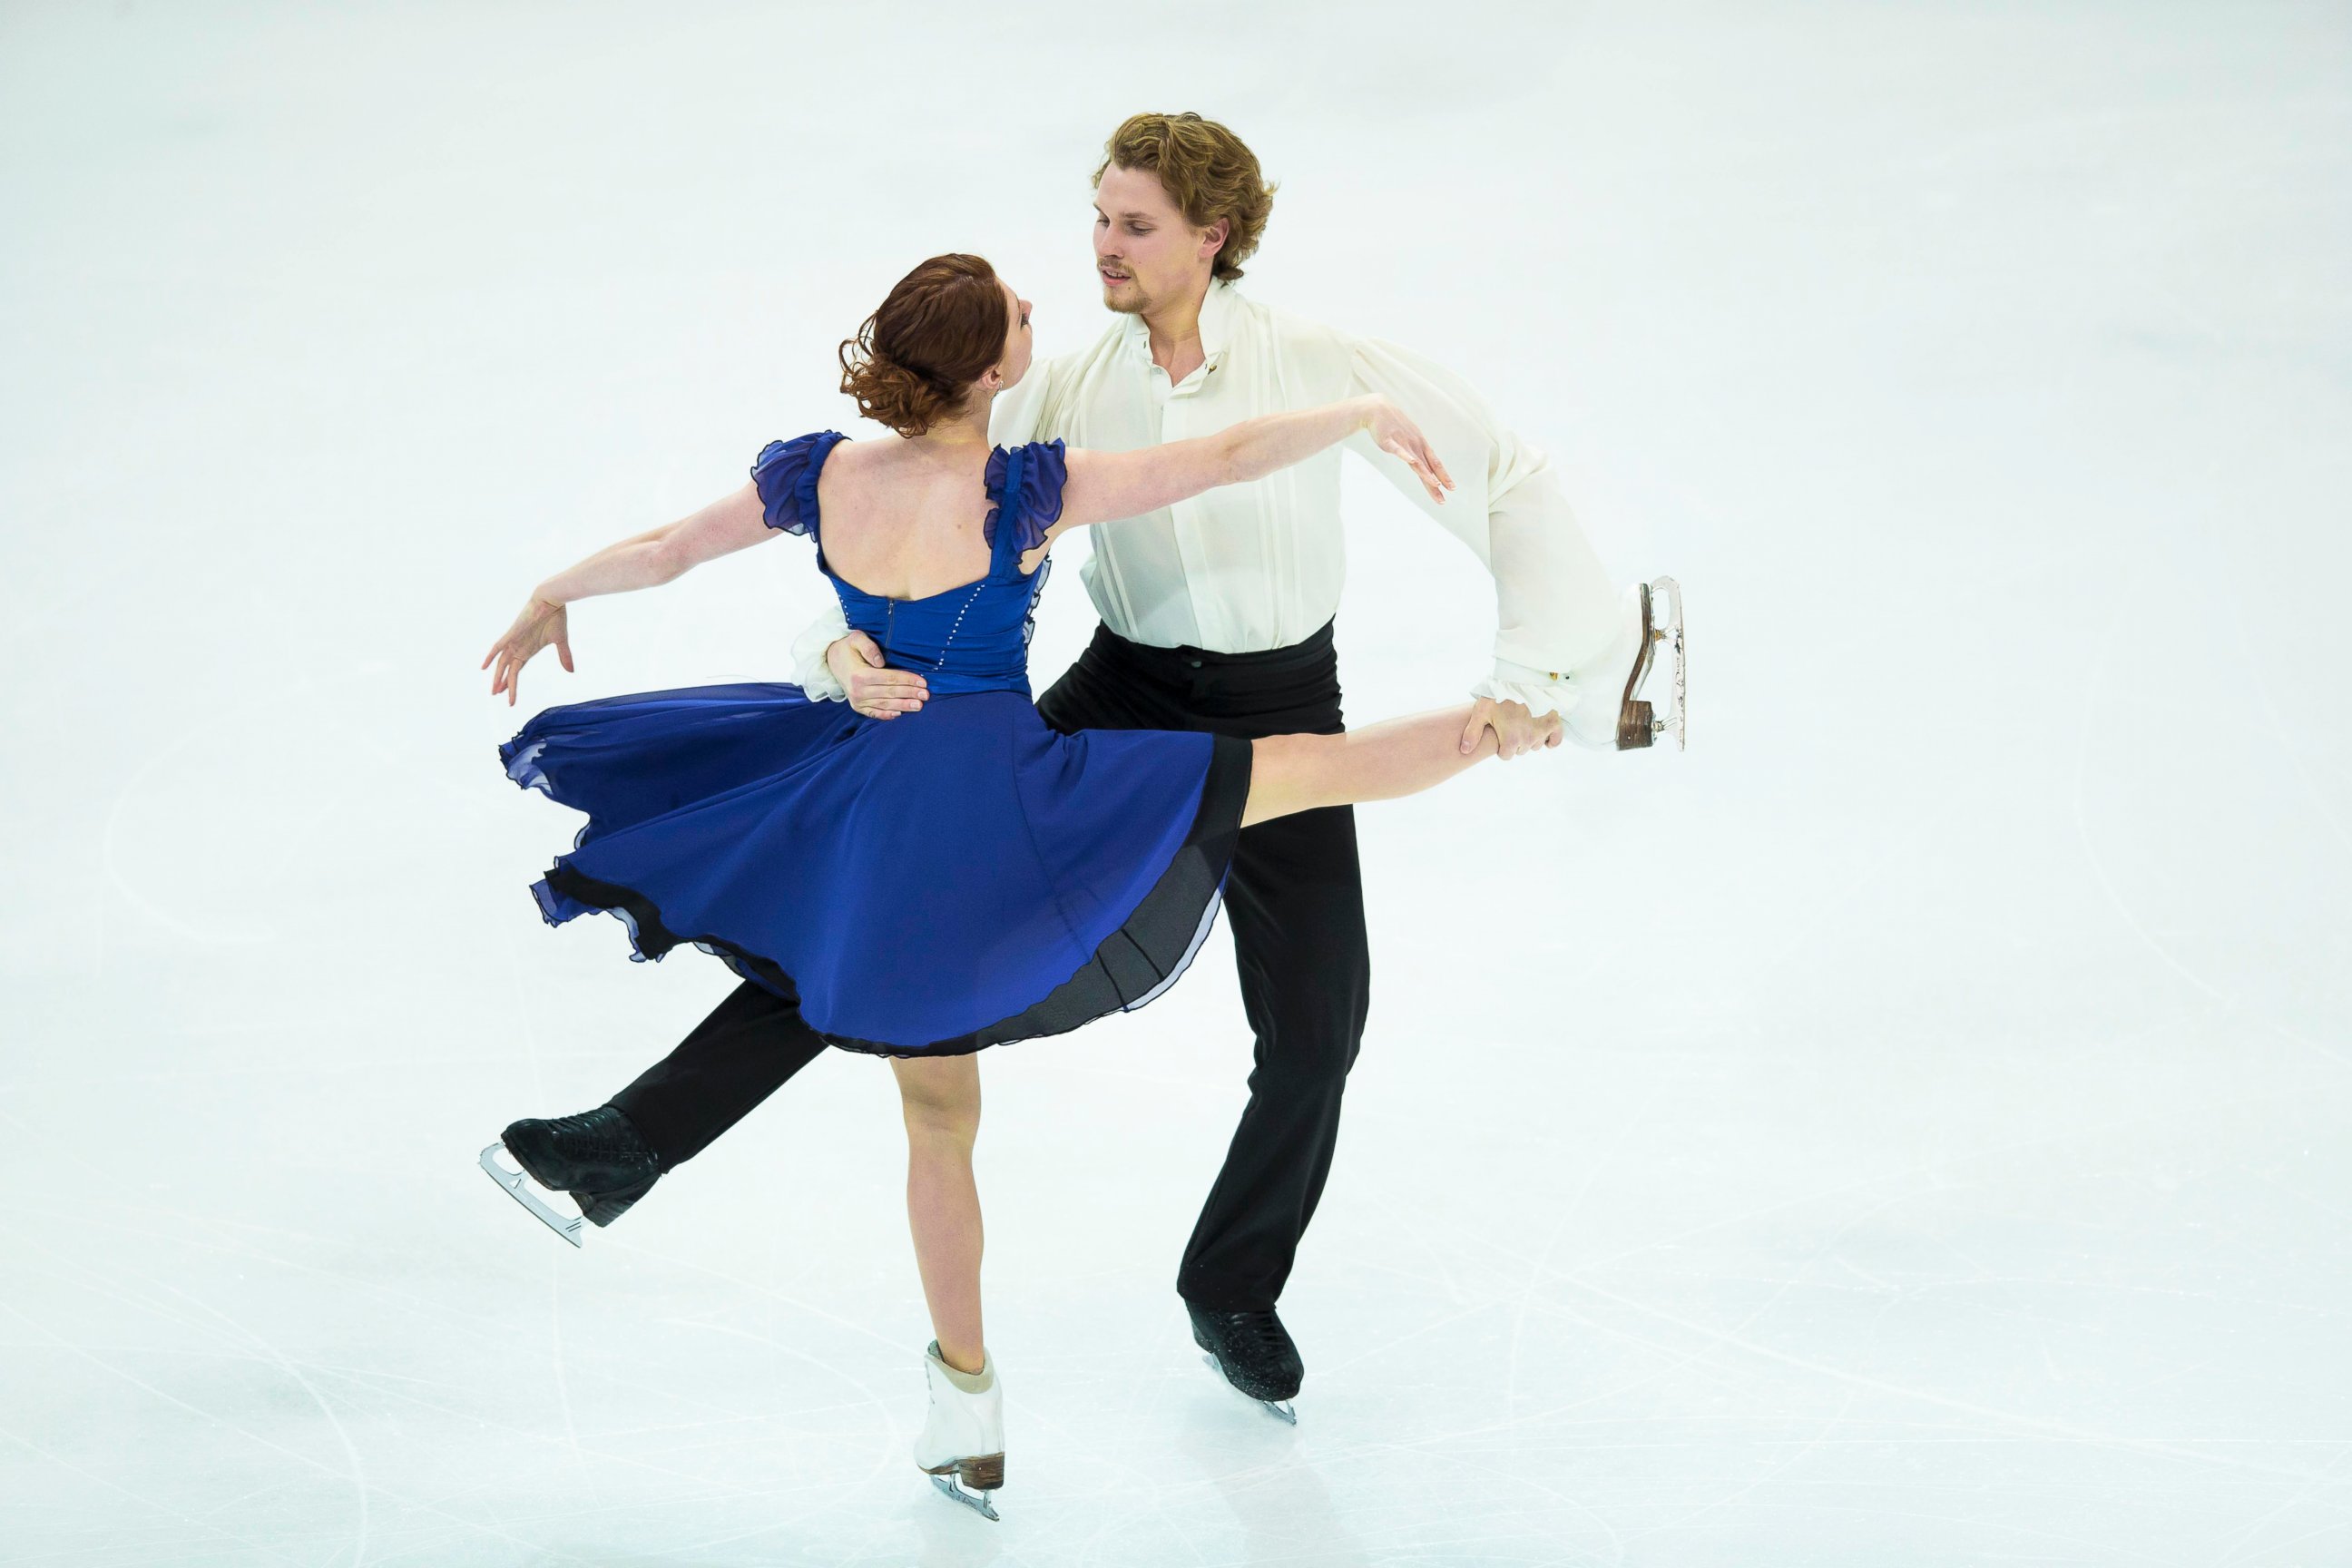 PHOTO: Nicole Orford and Thomas Williams of Canada perform their routine at the Ice Dance Free Dance event at the Four Continents Figure Skating Championships, Jan. 23, 2014, in Taipei, Taiwan. 